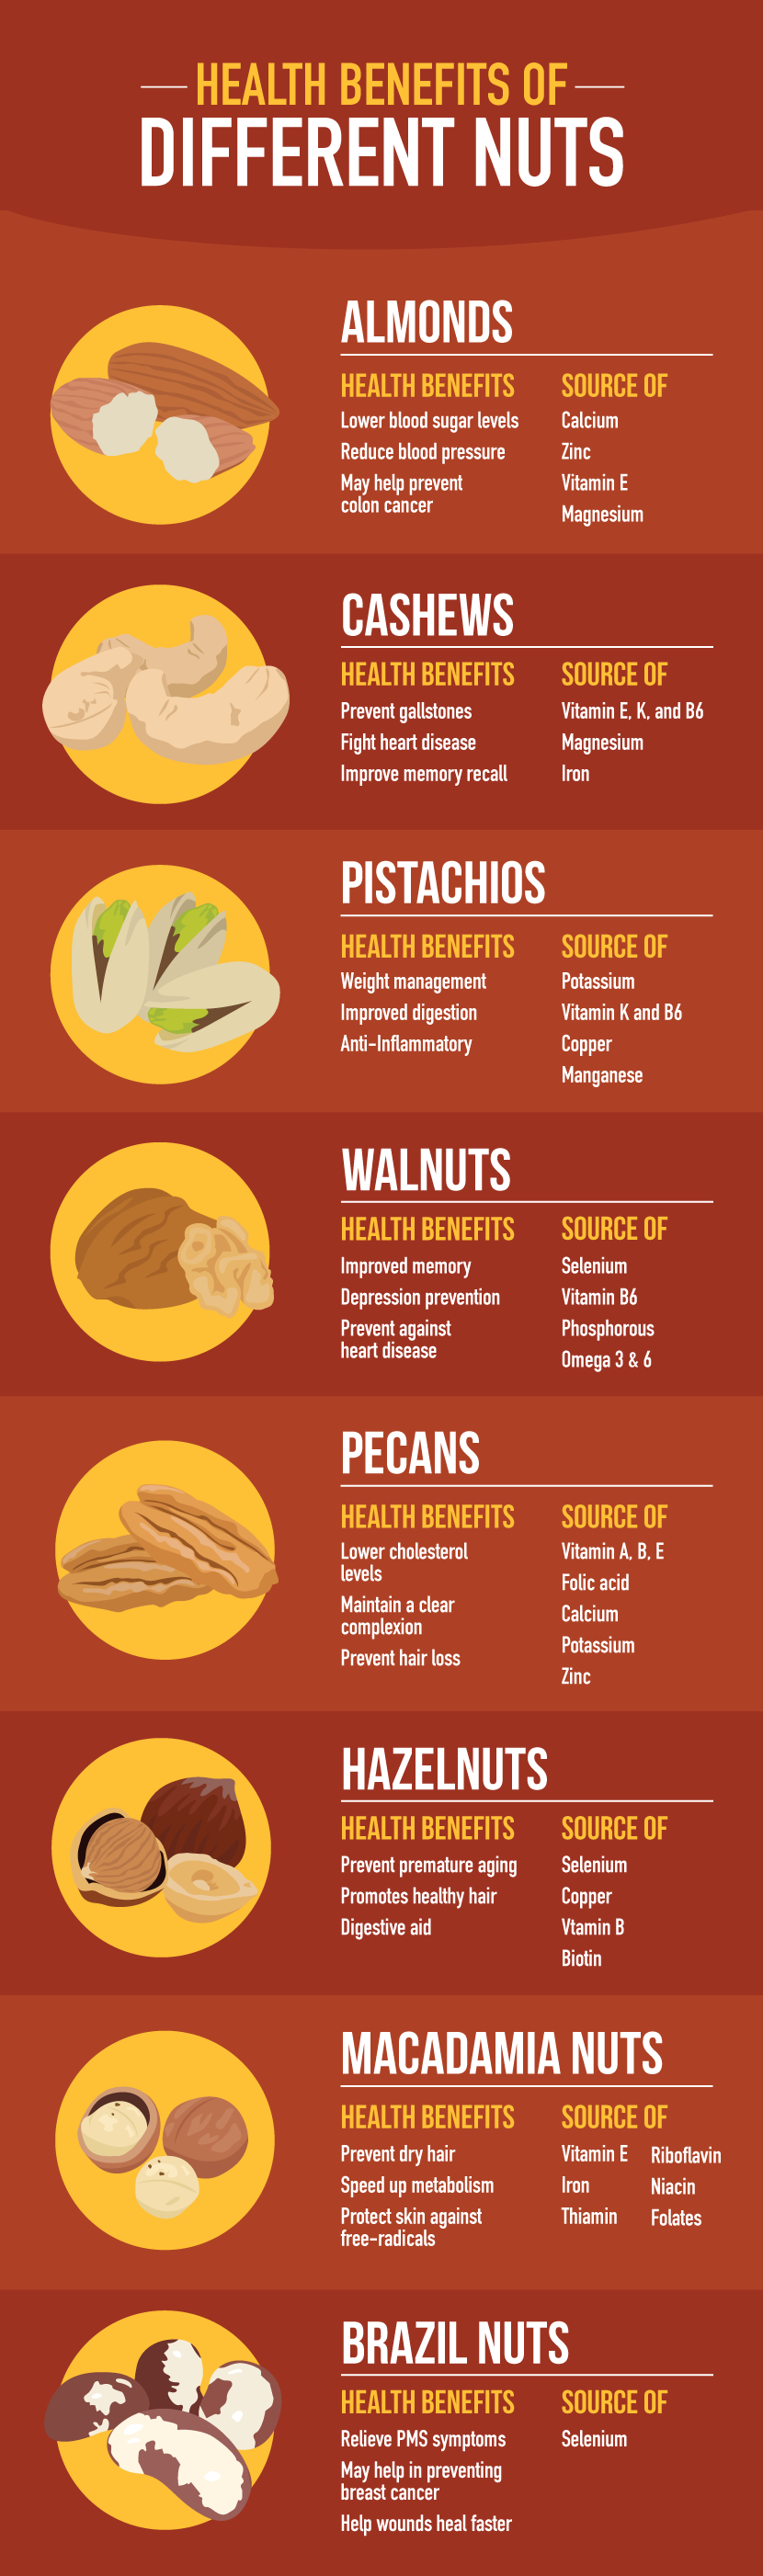 Health Benefits of Nuts - Cracking the Case on Nuts